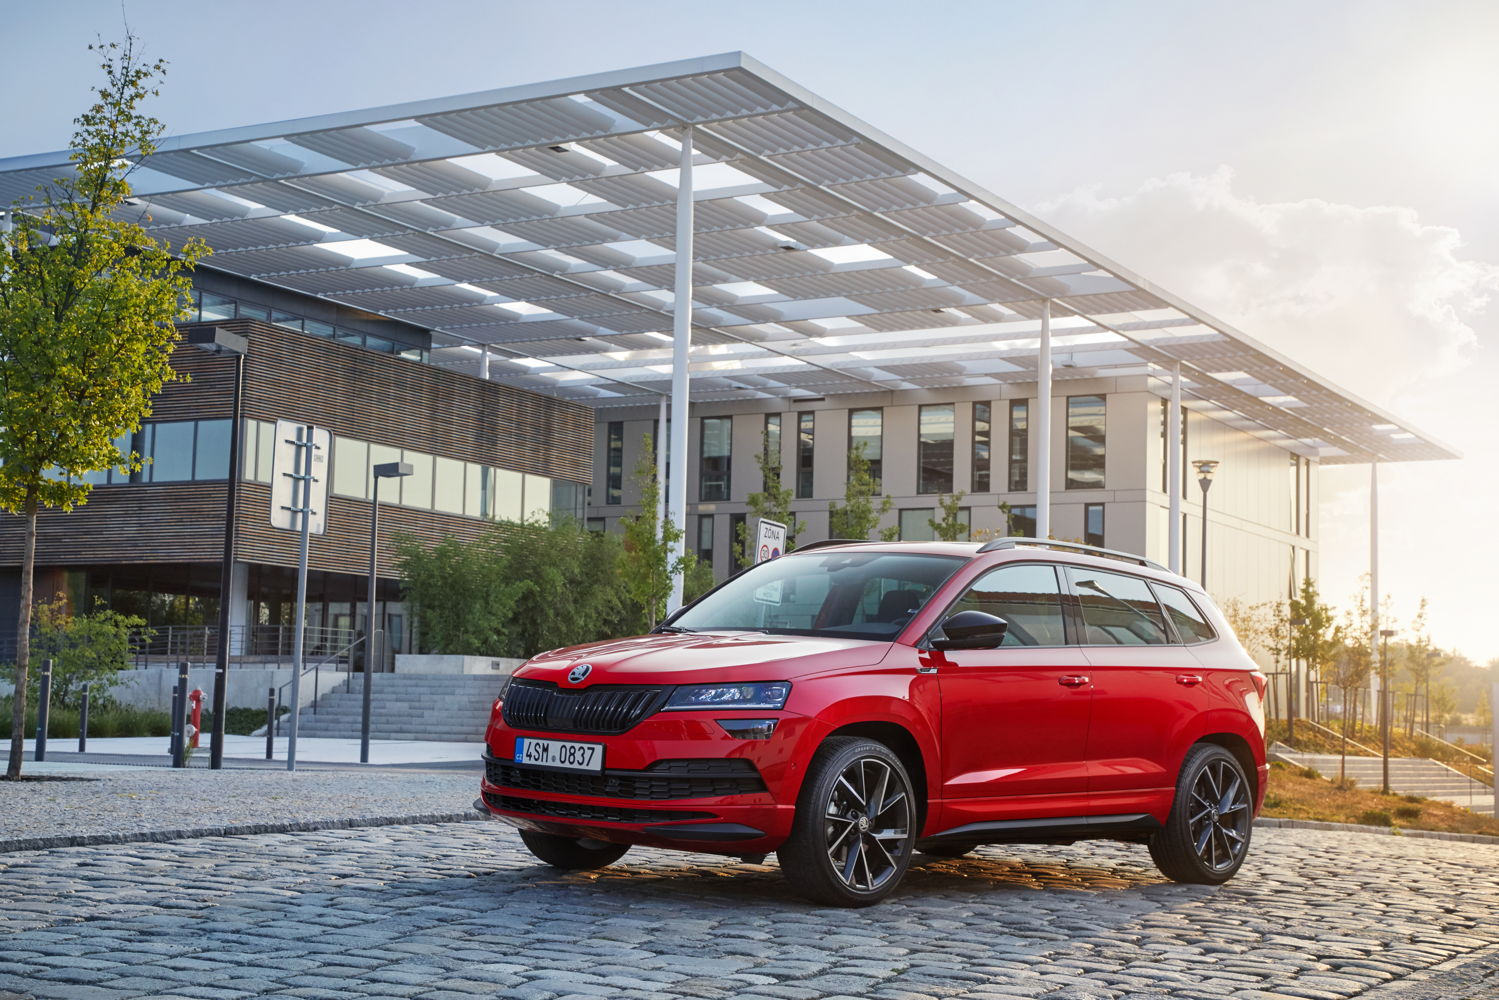 ŠKODA continues to set records: Between January and October, the Czech car manufacturer grew worldwide compared to the same period last year. The carmaker's deliveries in the first ten months of this year increased in Europe (+ 4.3%), China (+ 12.5%), Russia (+ 28.7%) and India (+ 2.4%).